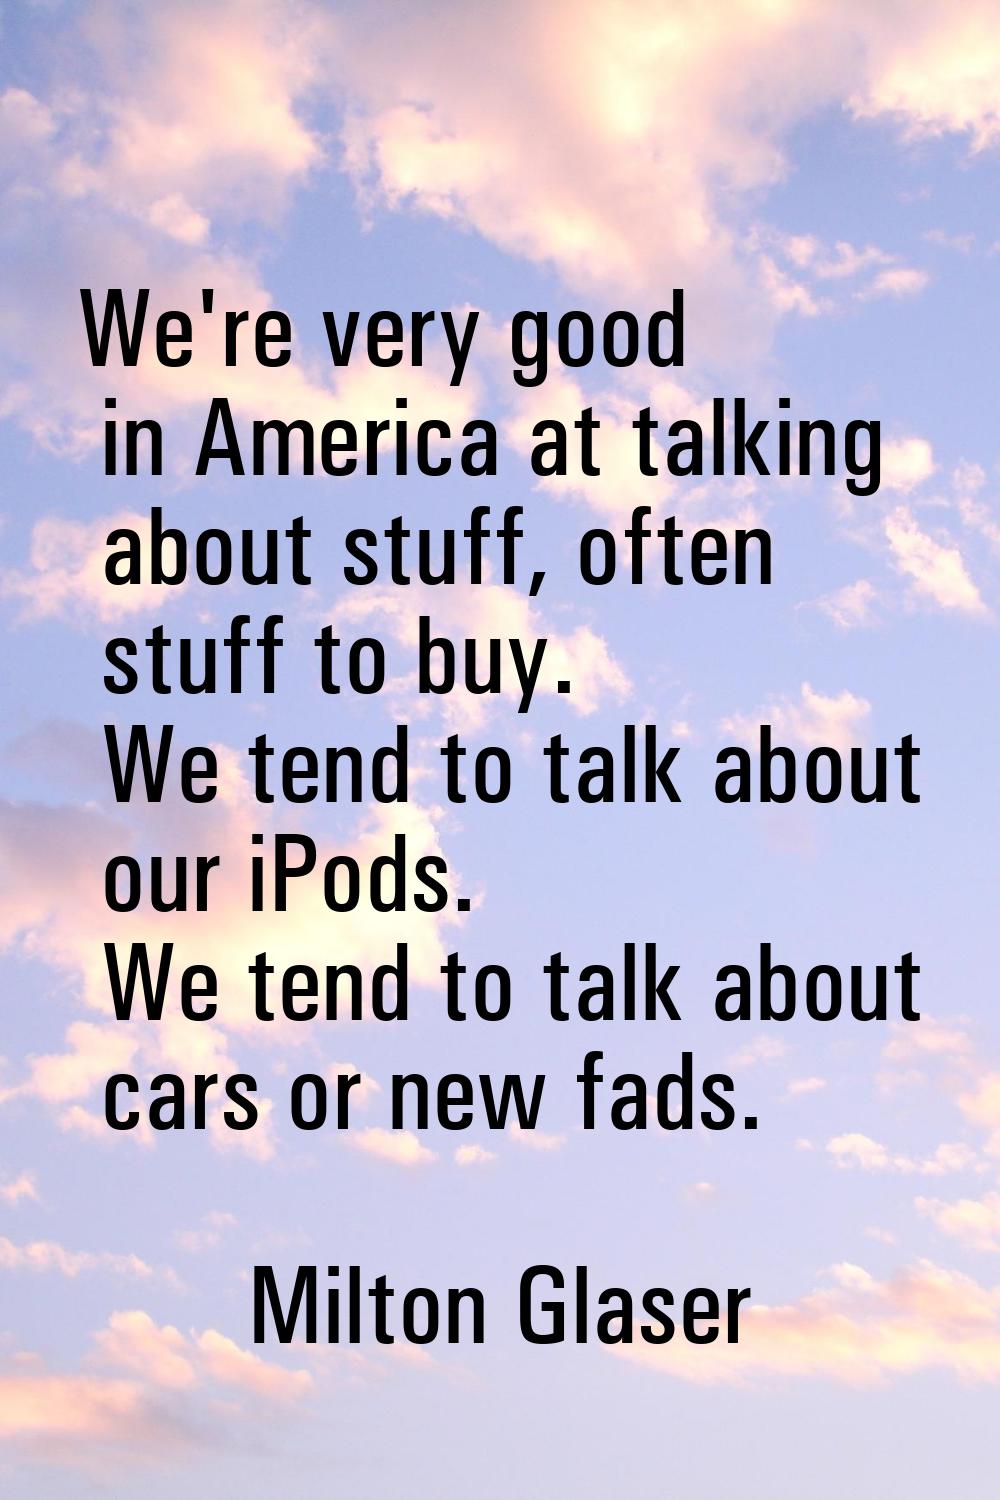 We're very good in America at talking about stuff, often stuff to buy. We tend to talk about our iP